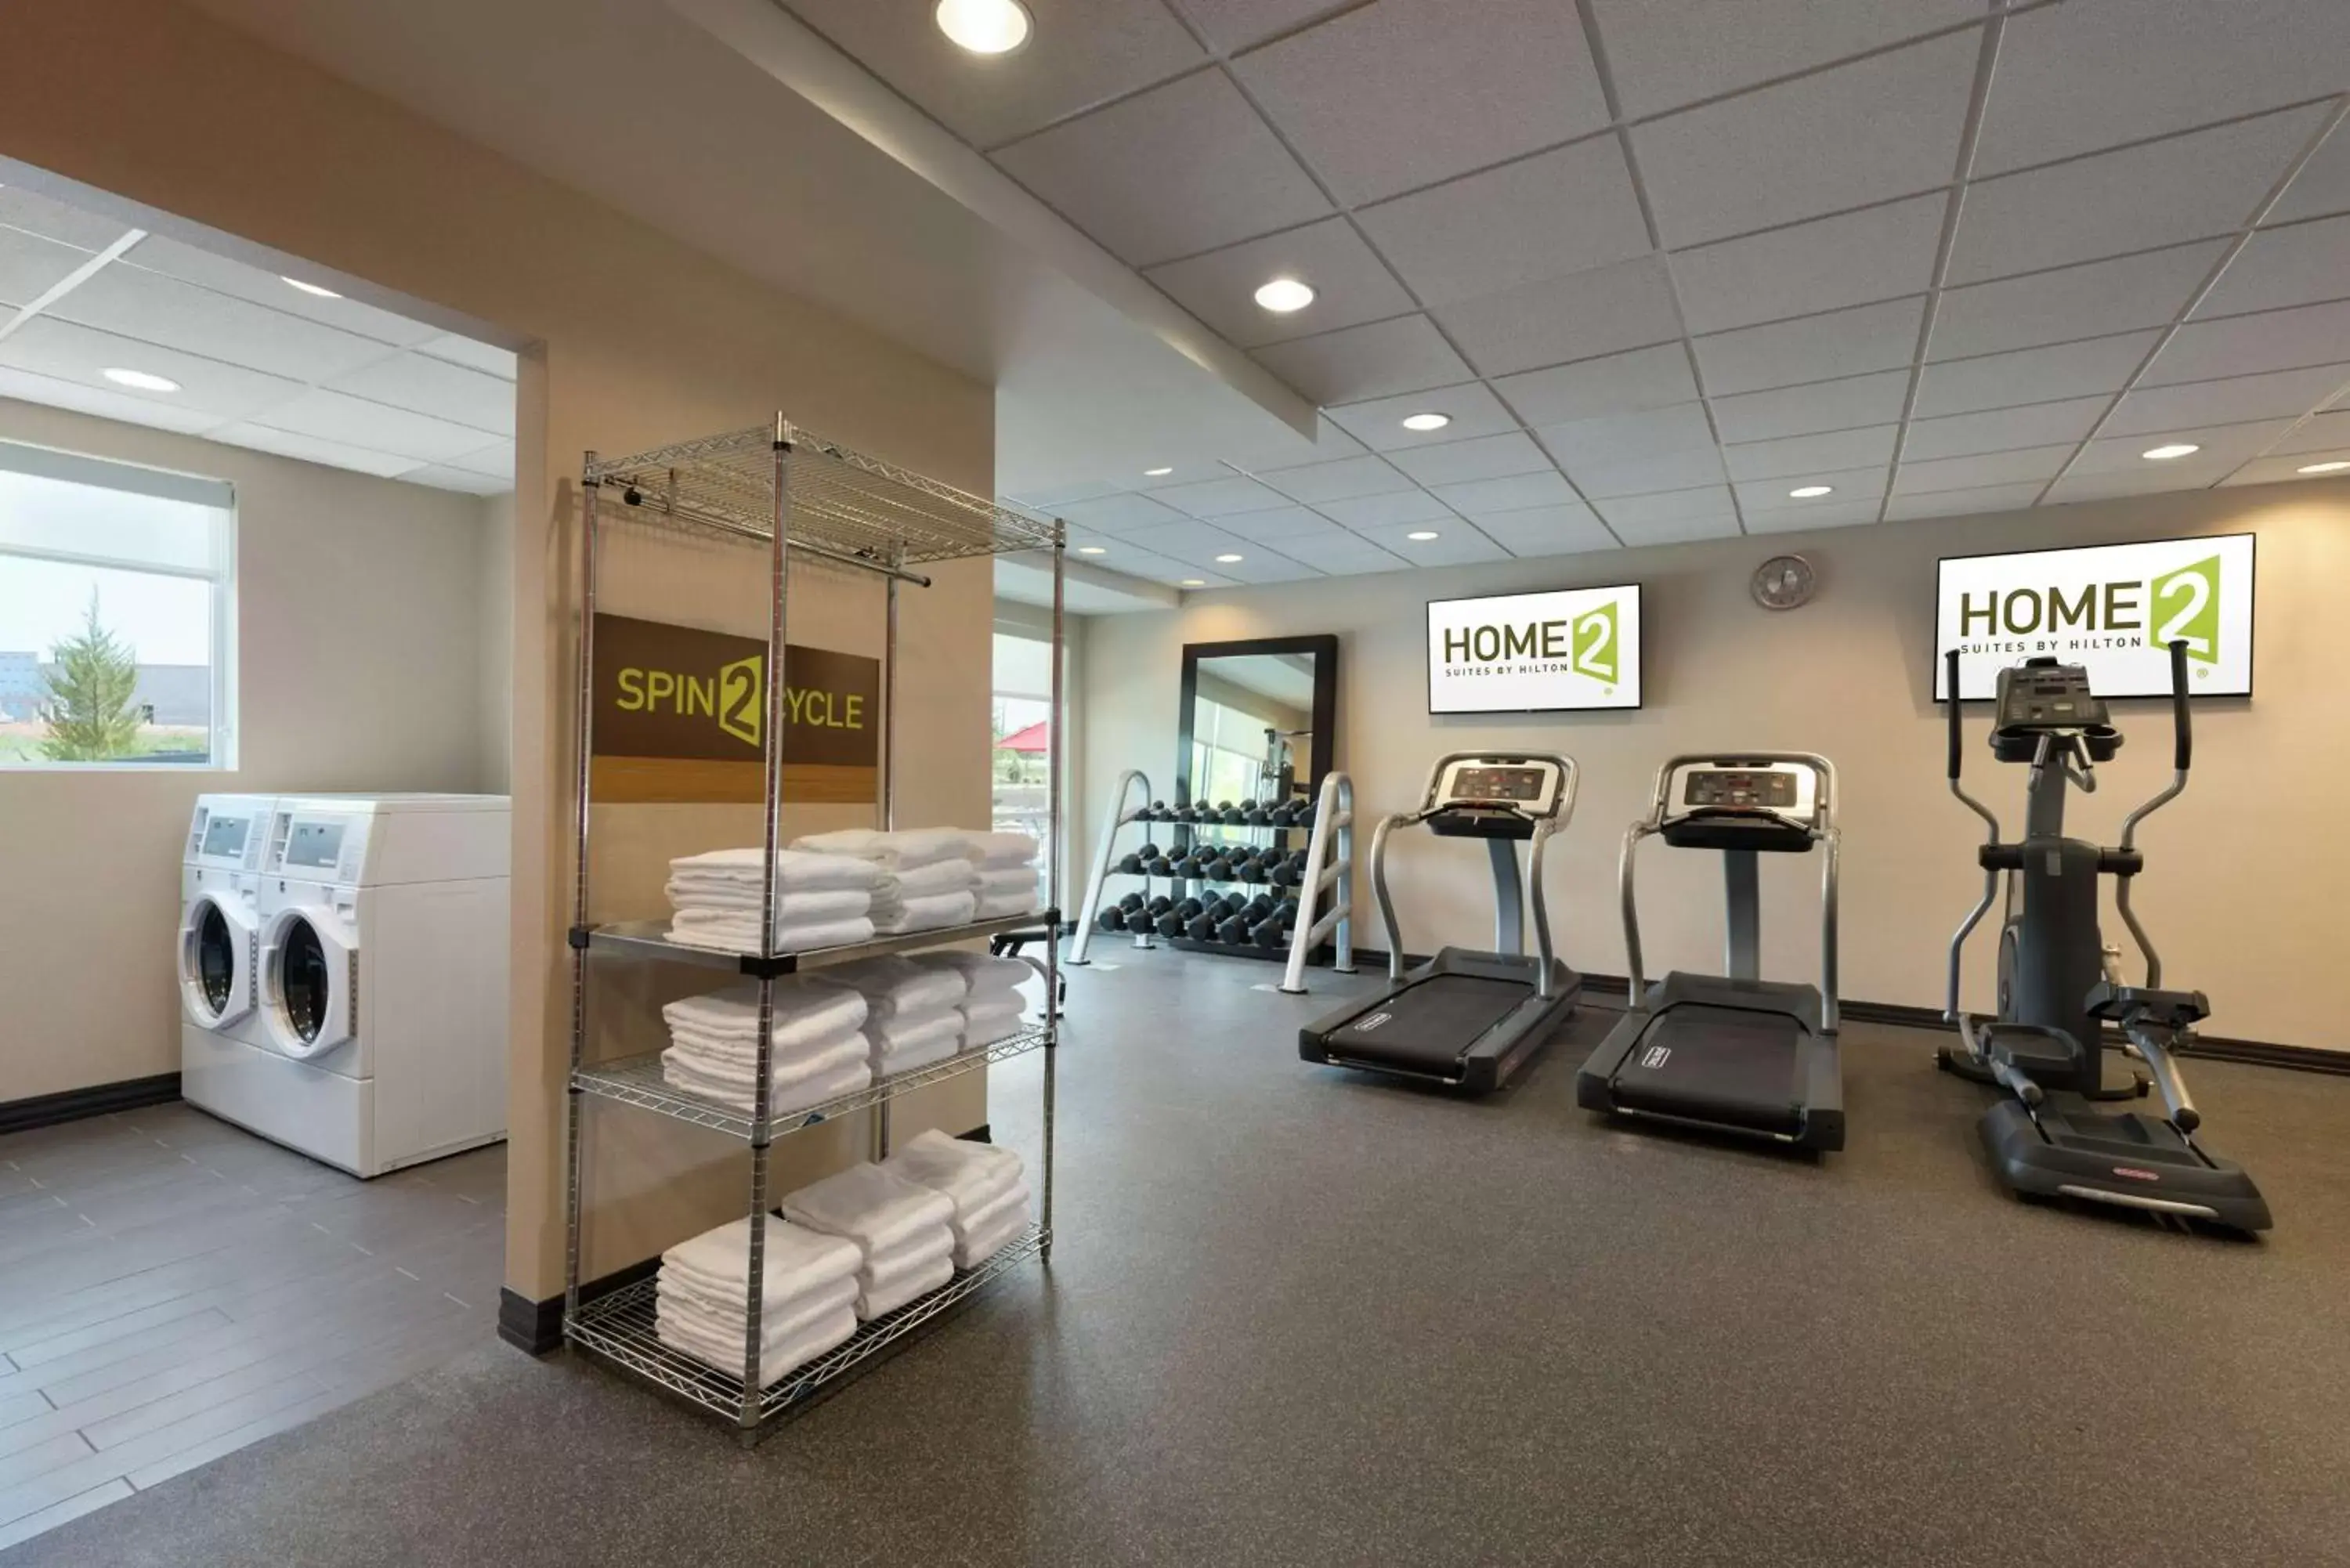 Fitness centre/facilities, Fitness Center/Facilities in Home2 Suites by Hilton Atlanta South/McDonough